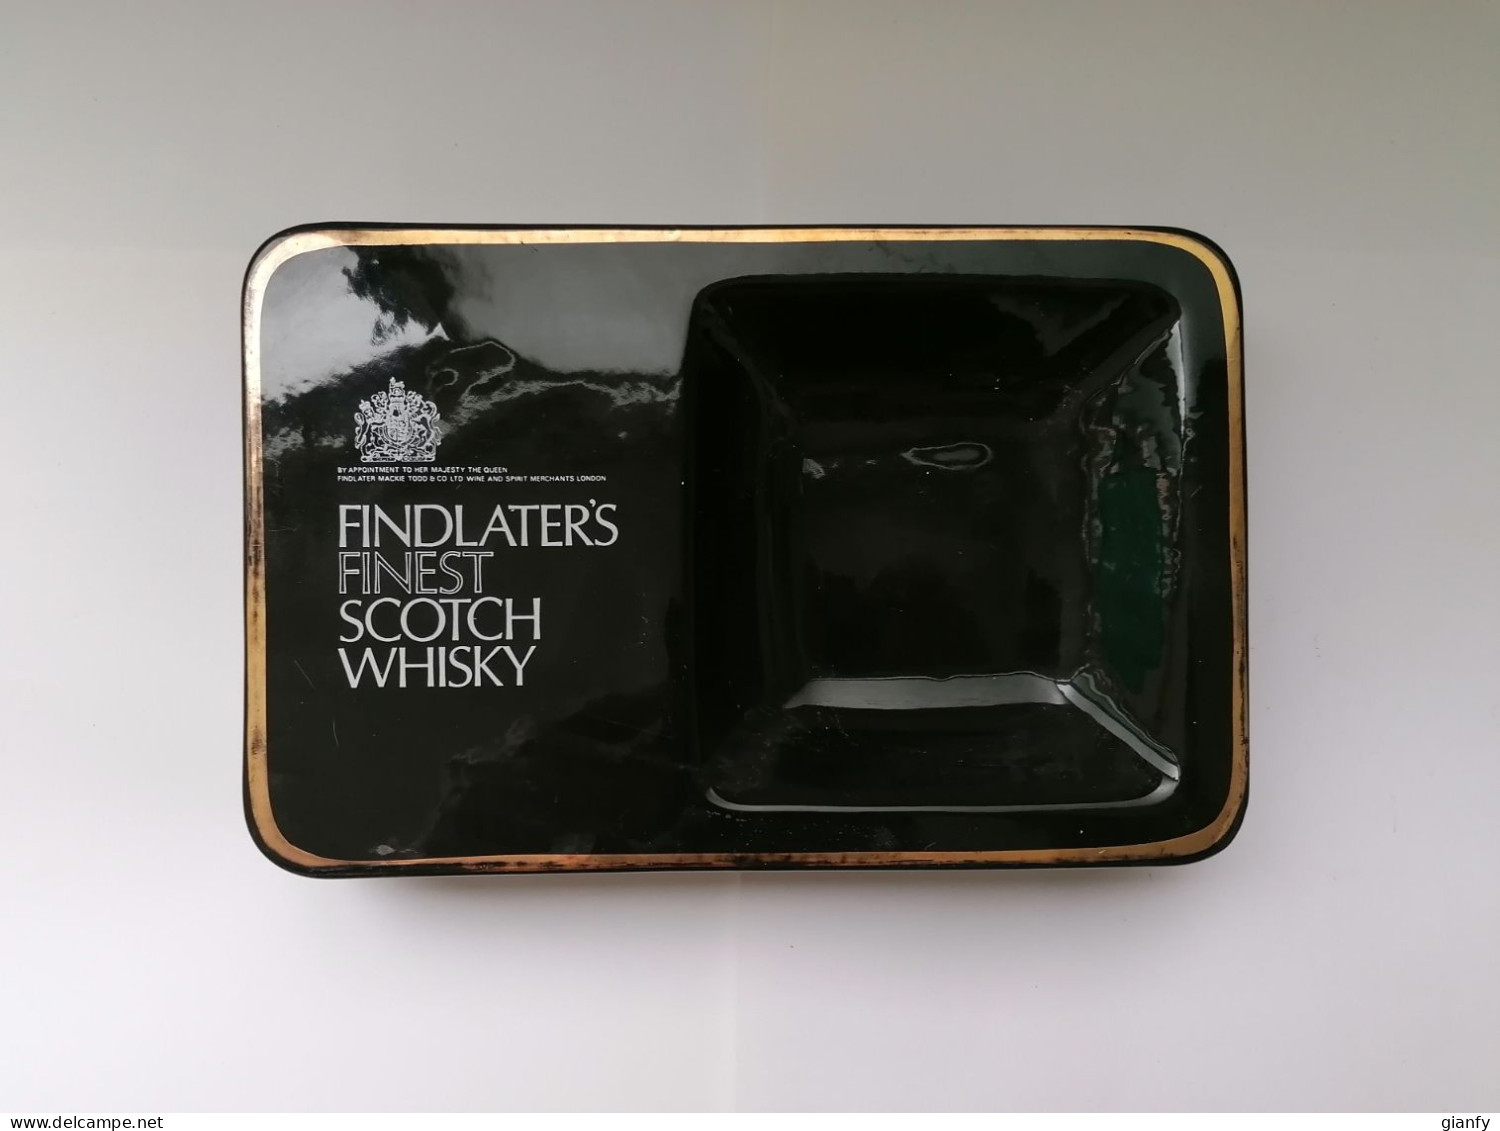 POSACENERE IN CERAMICA PUBBLICITA "FINDLATER'S" FINEST SCOTCH WHISKY 1990 ASHTRAY ADVERTISING MADE IN ENGLAND - Porcelaine